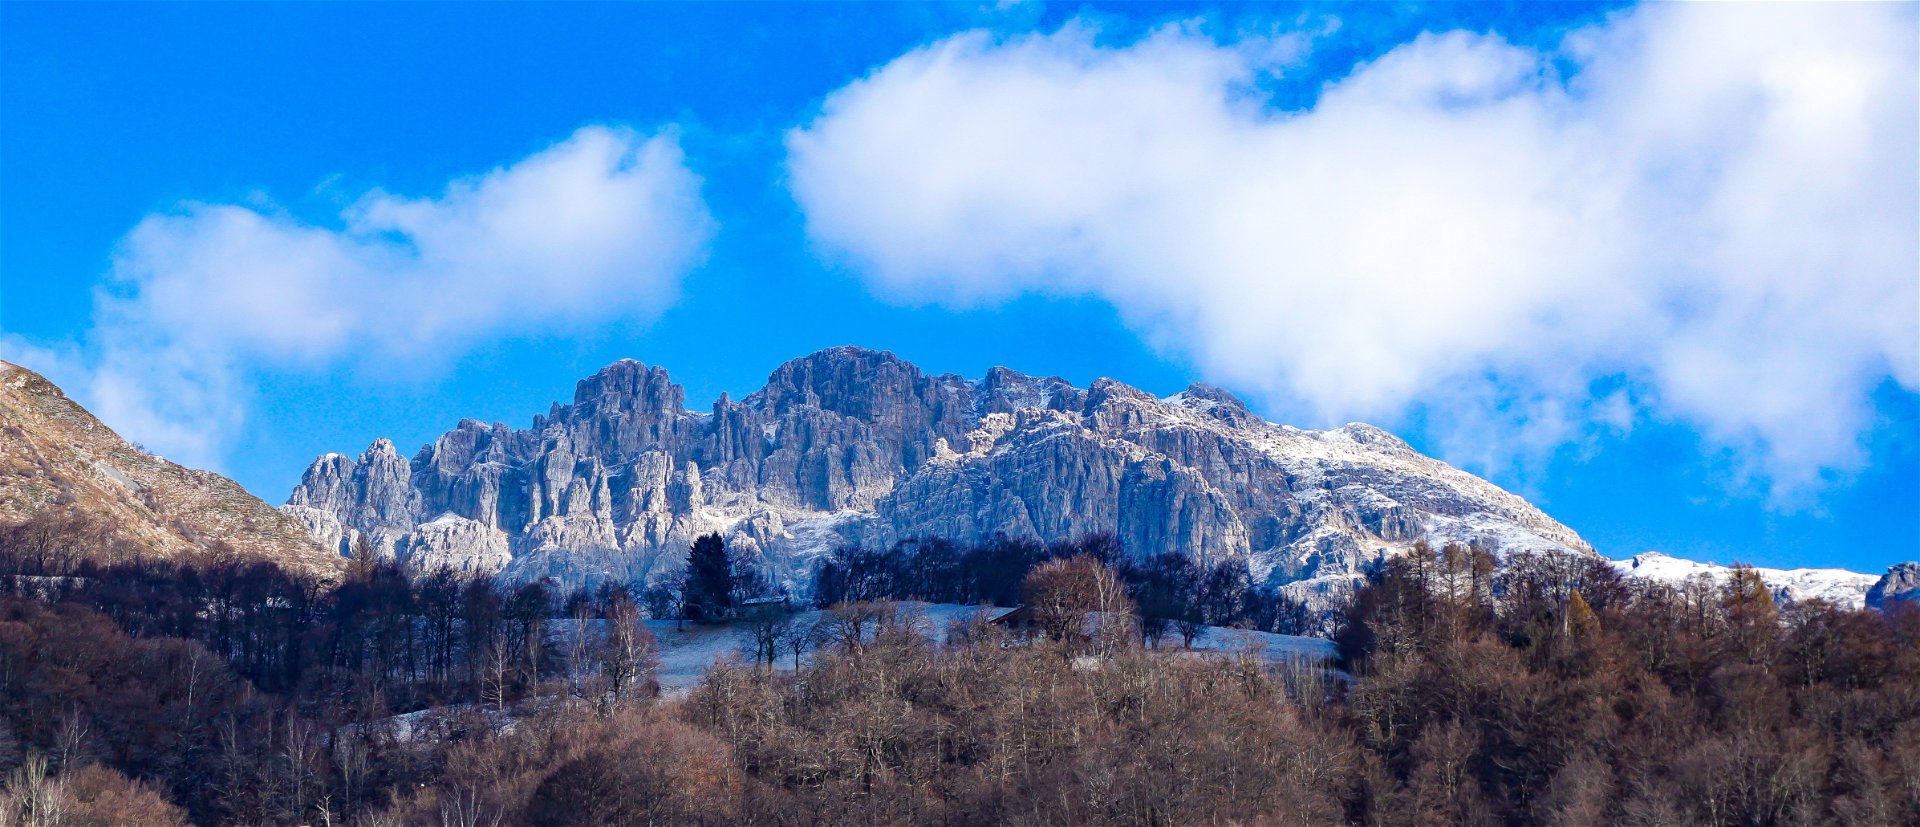 Province of Lecco